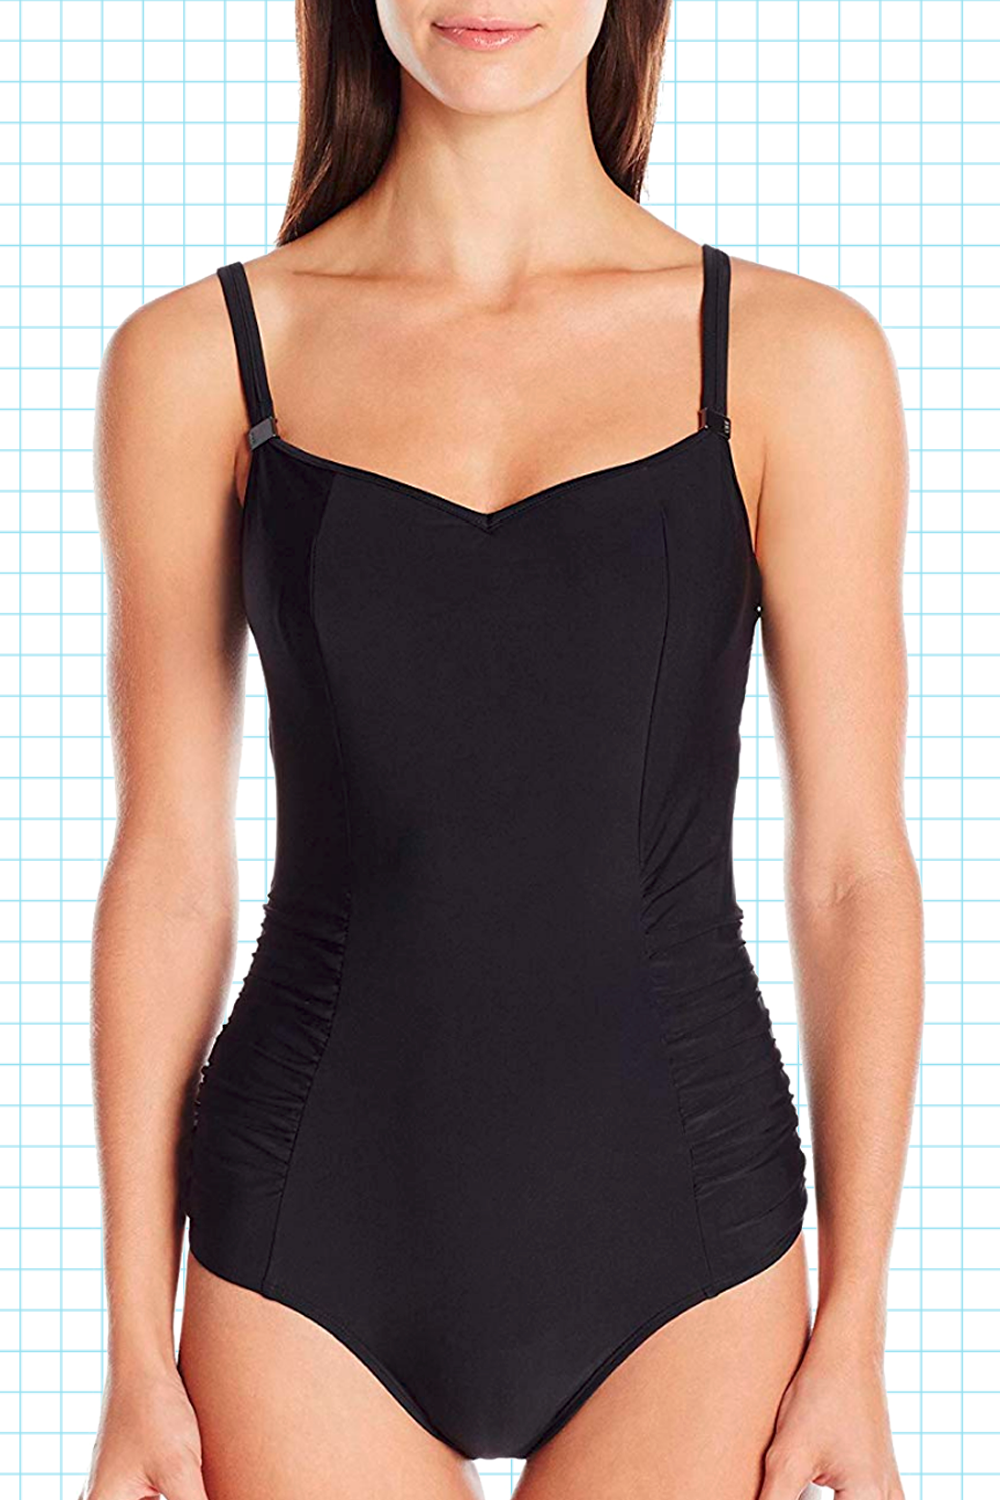 Nike One Piece Swimsuit Size Chart